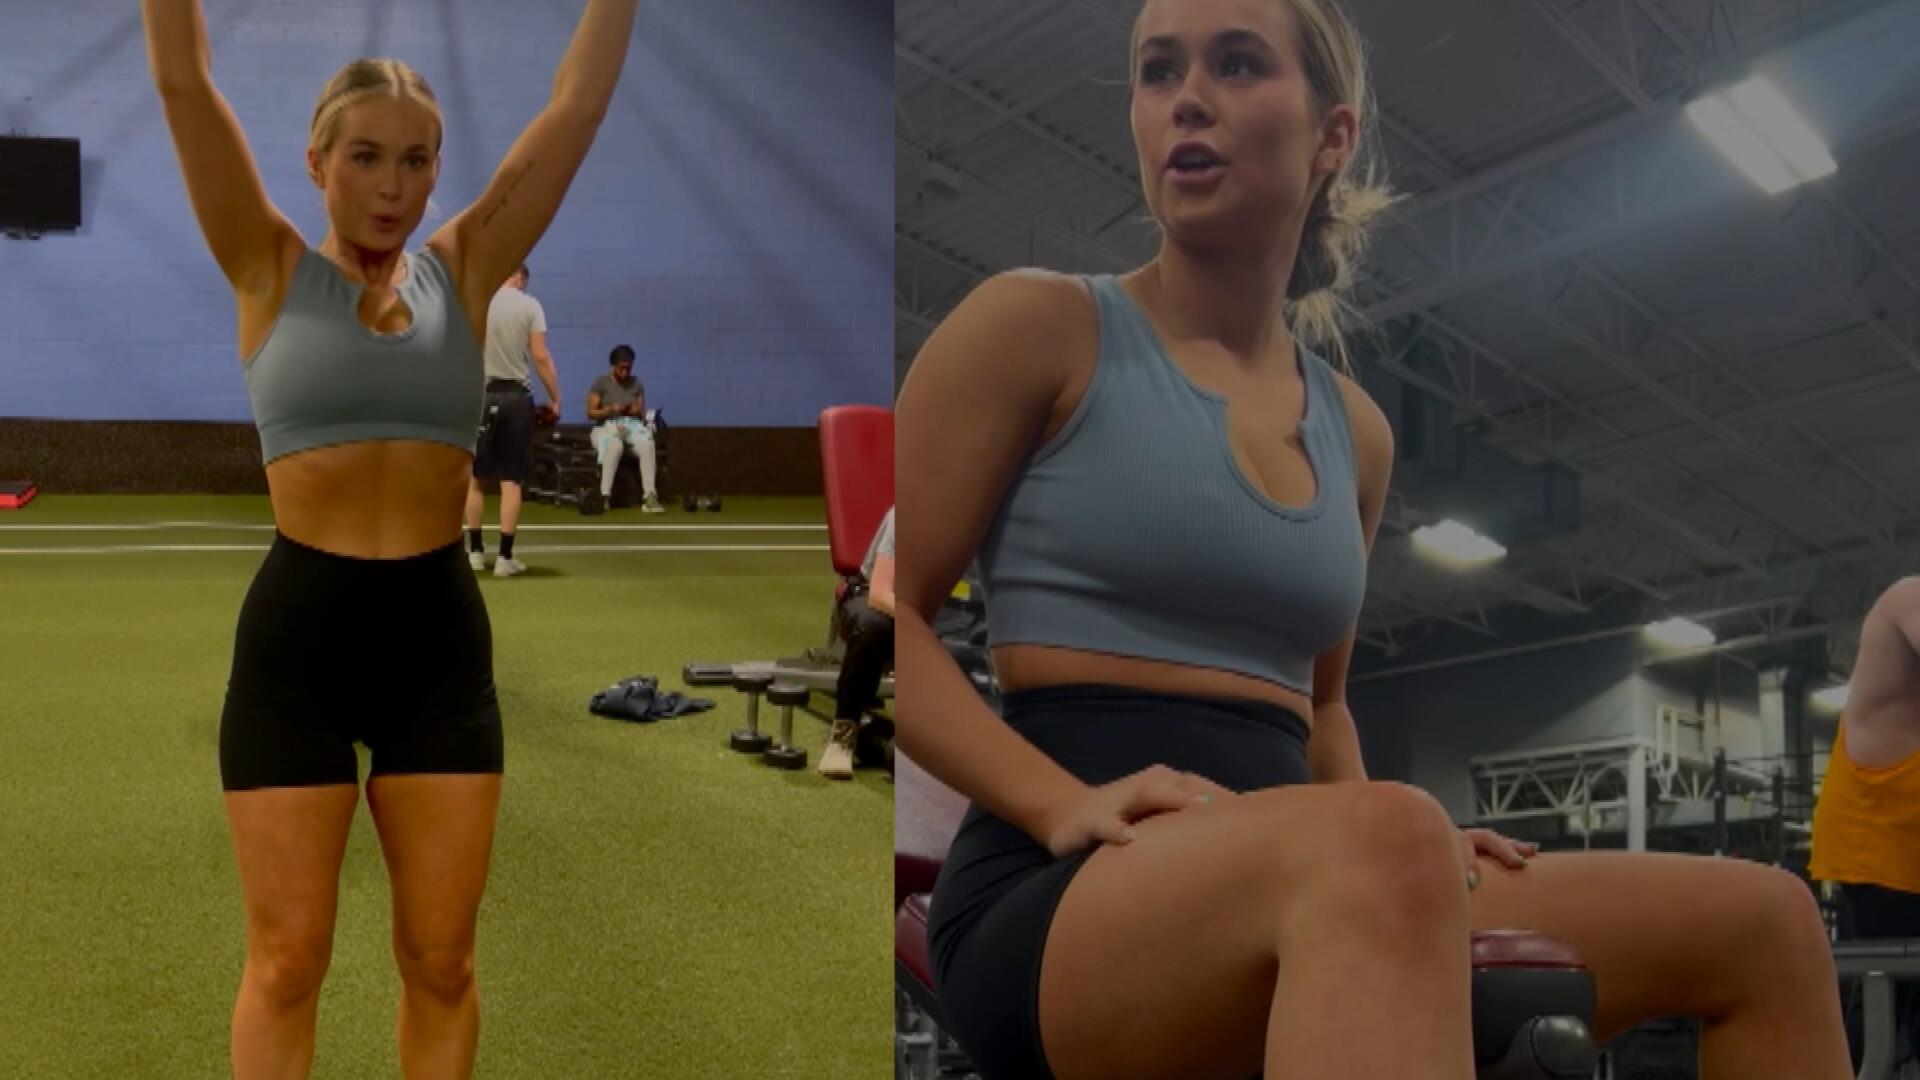 Woman left utterly mortified when working out in her underwear and